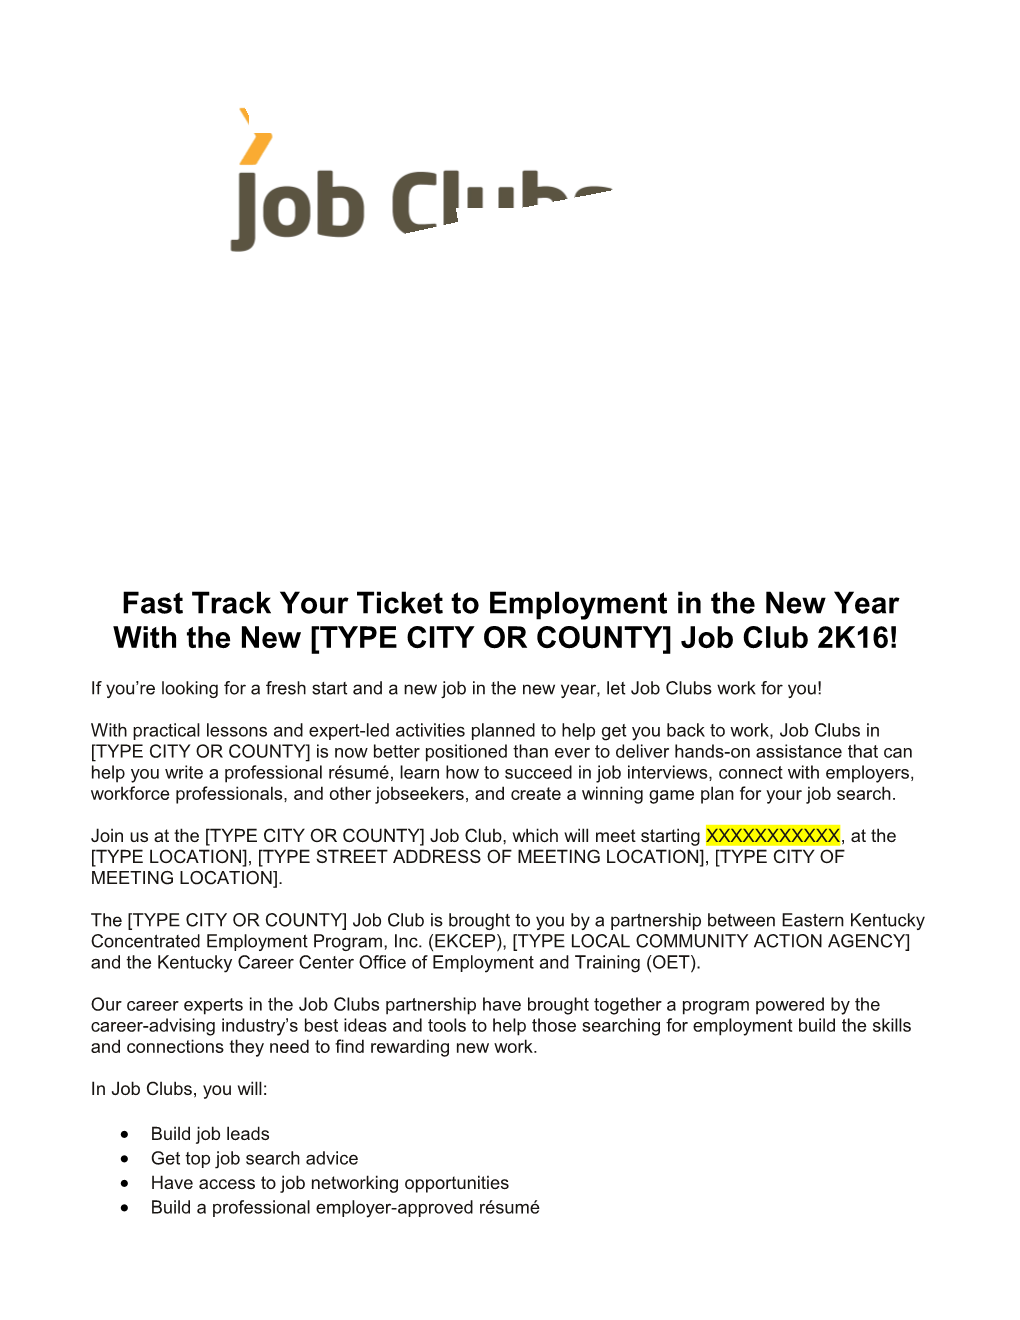 Fast Track Your Ticket to Employment in the New Year with the New TYPE CITY OR COUNTY